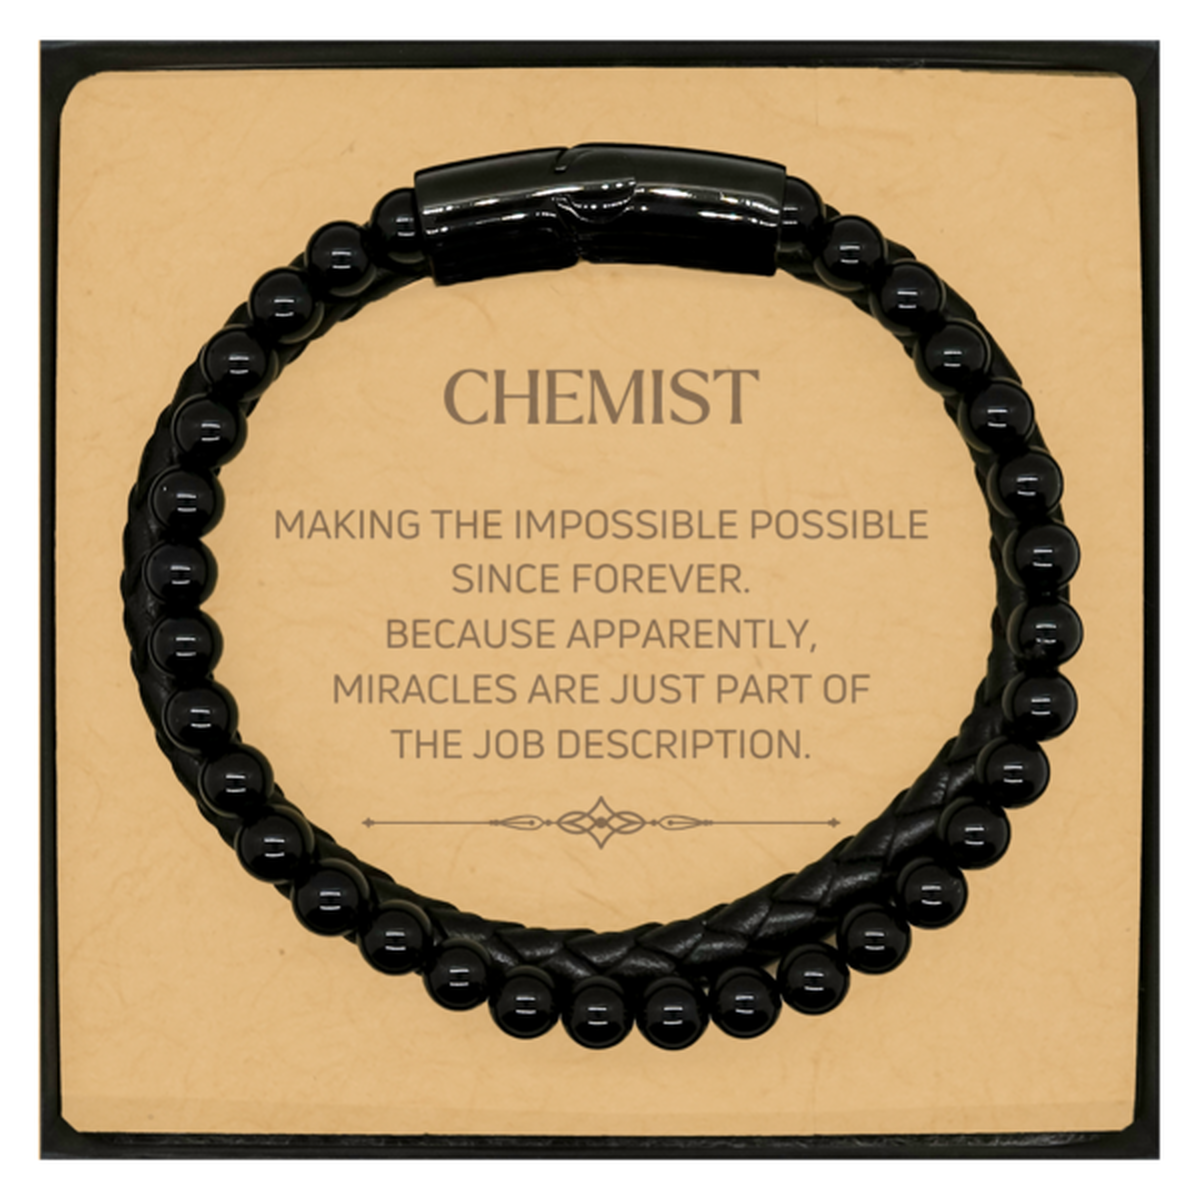 Funny Chemist Gifts, Miracles are just part of the job description, Inspirational Birthday Christmas Stone Leather Bracelets For Chemist, Men, Women, Coworkers, Friends, Boss